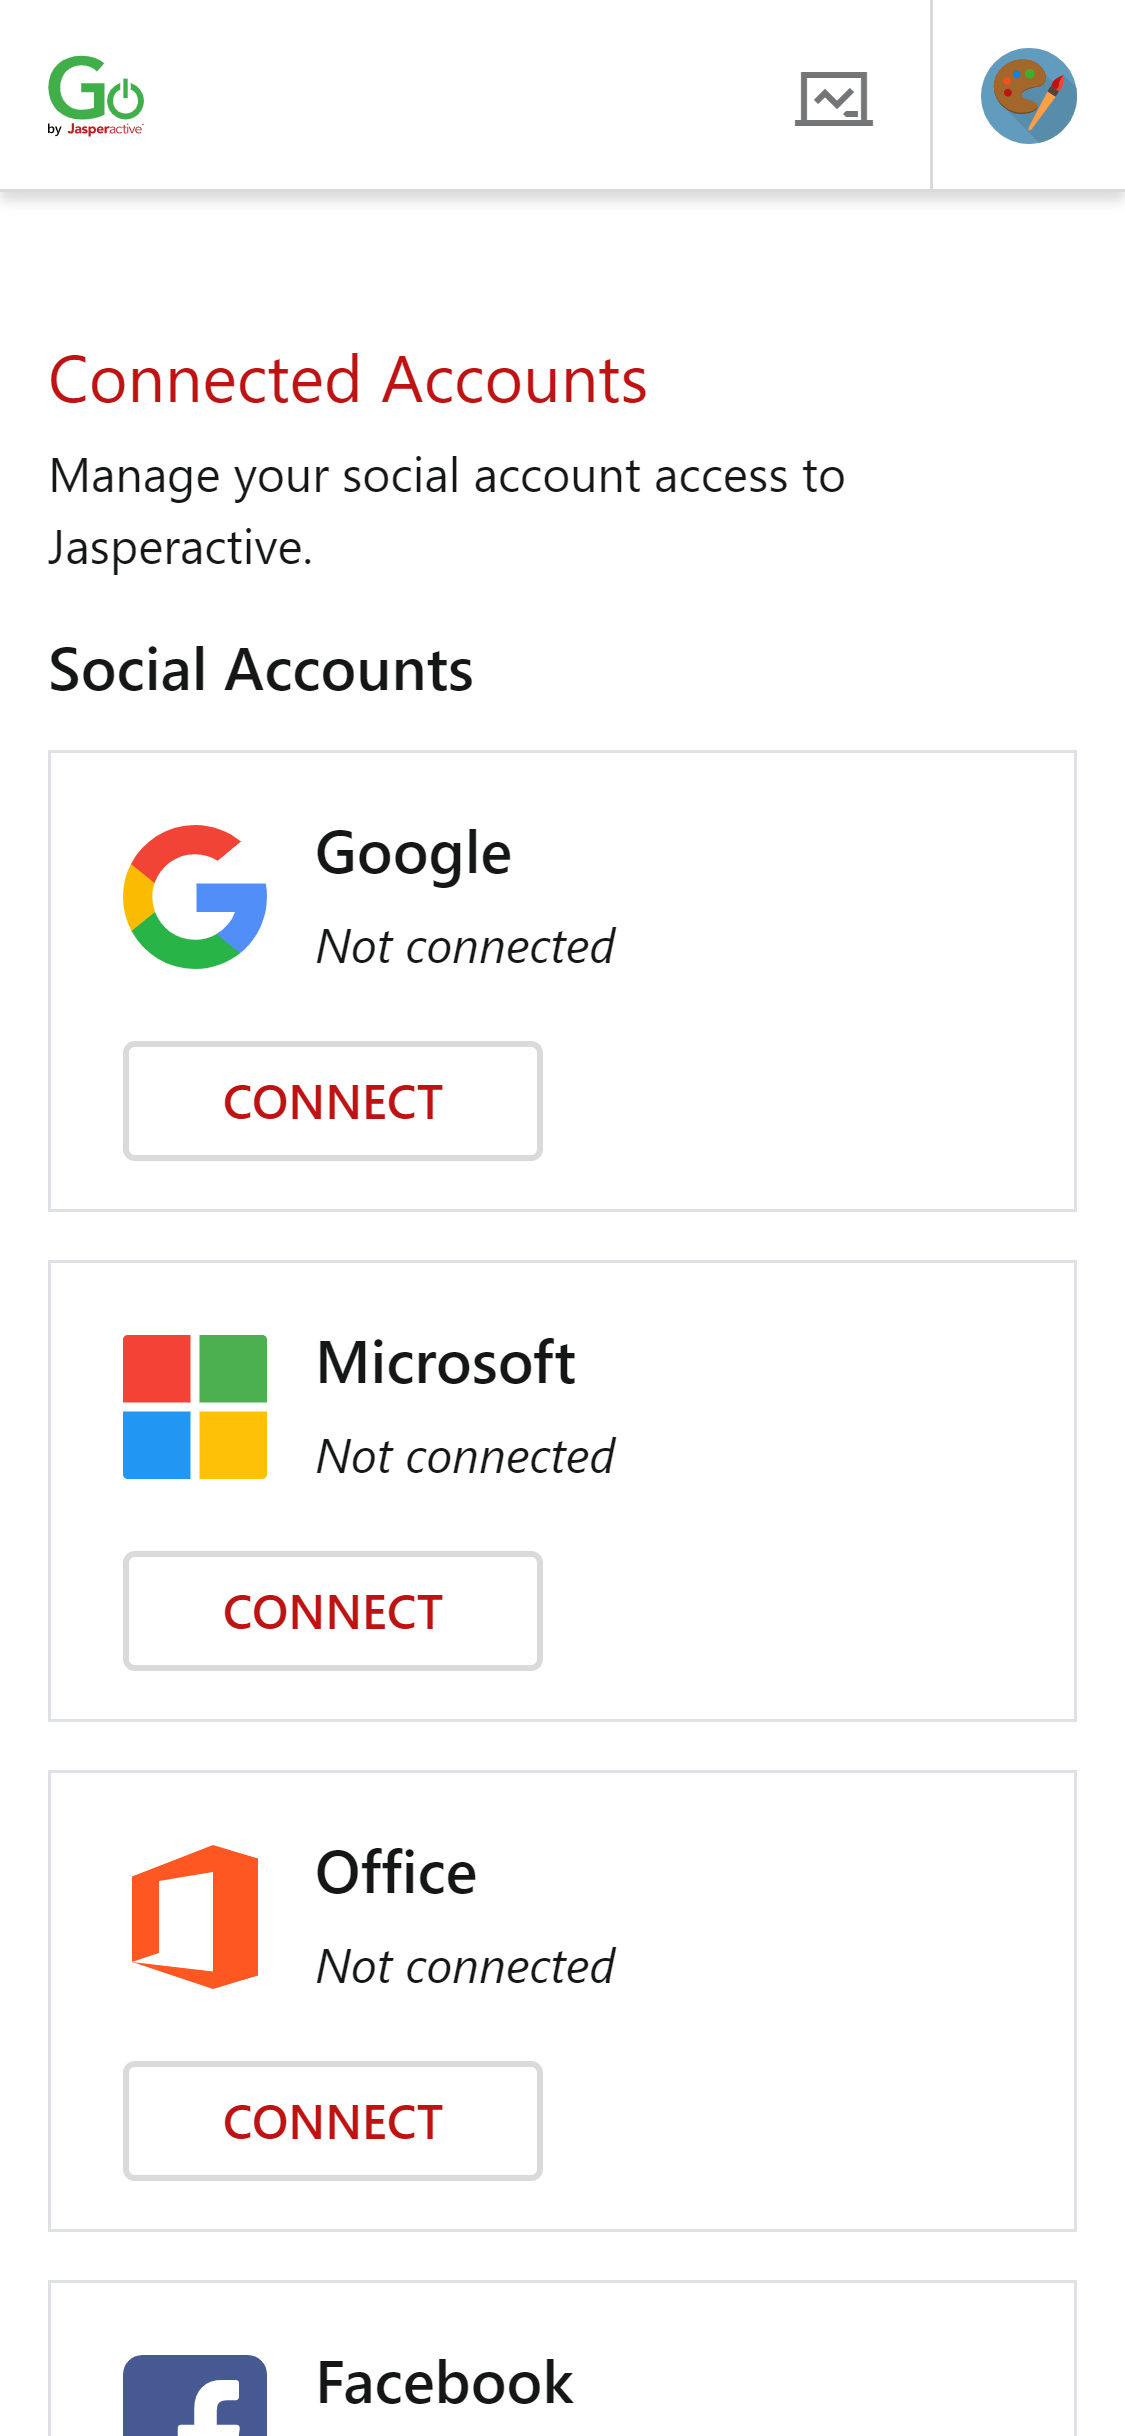 Go by Jasperactive Connecting accounts